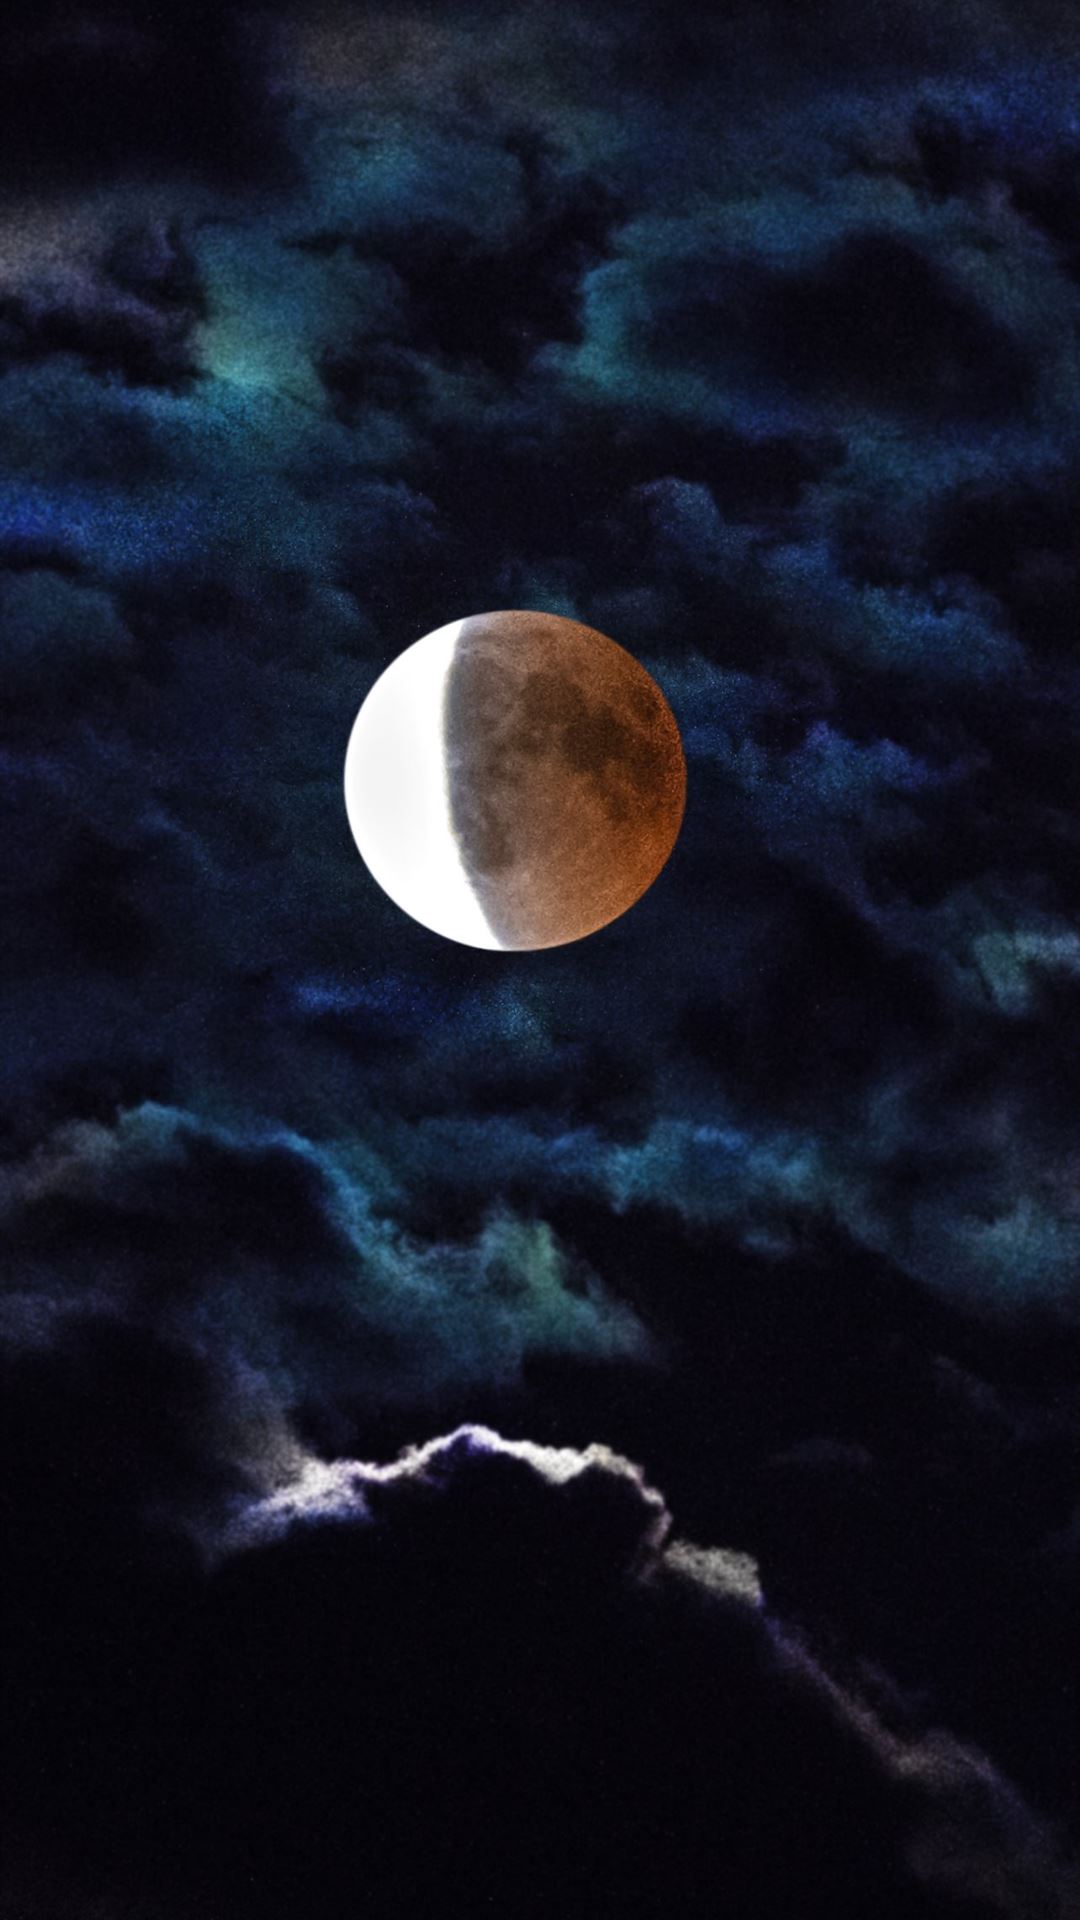 Eclipse blood moon dark clouds 4К Sony Xperia Z5 ... iPhone Wallpapers Free  Download